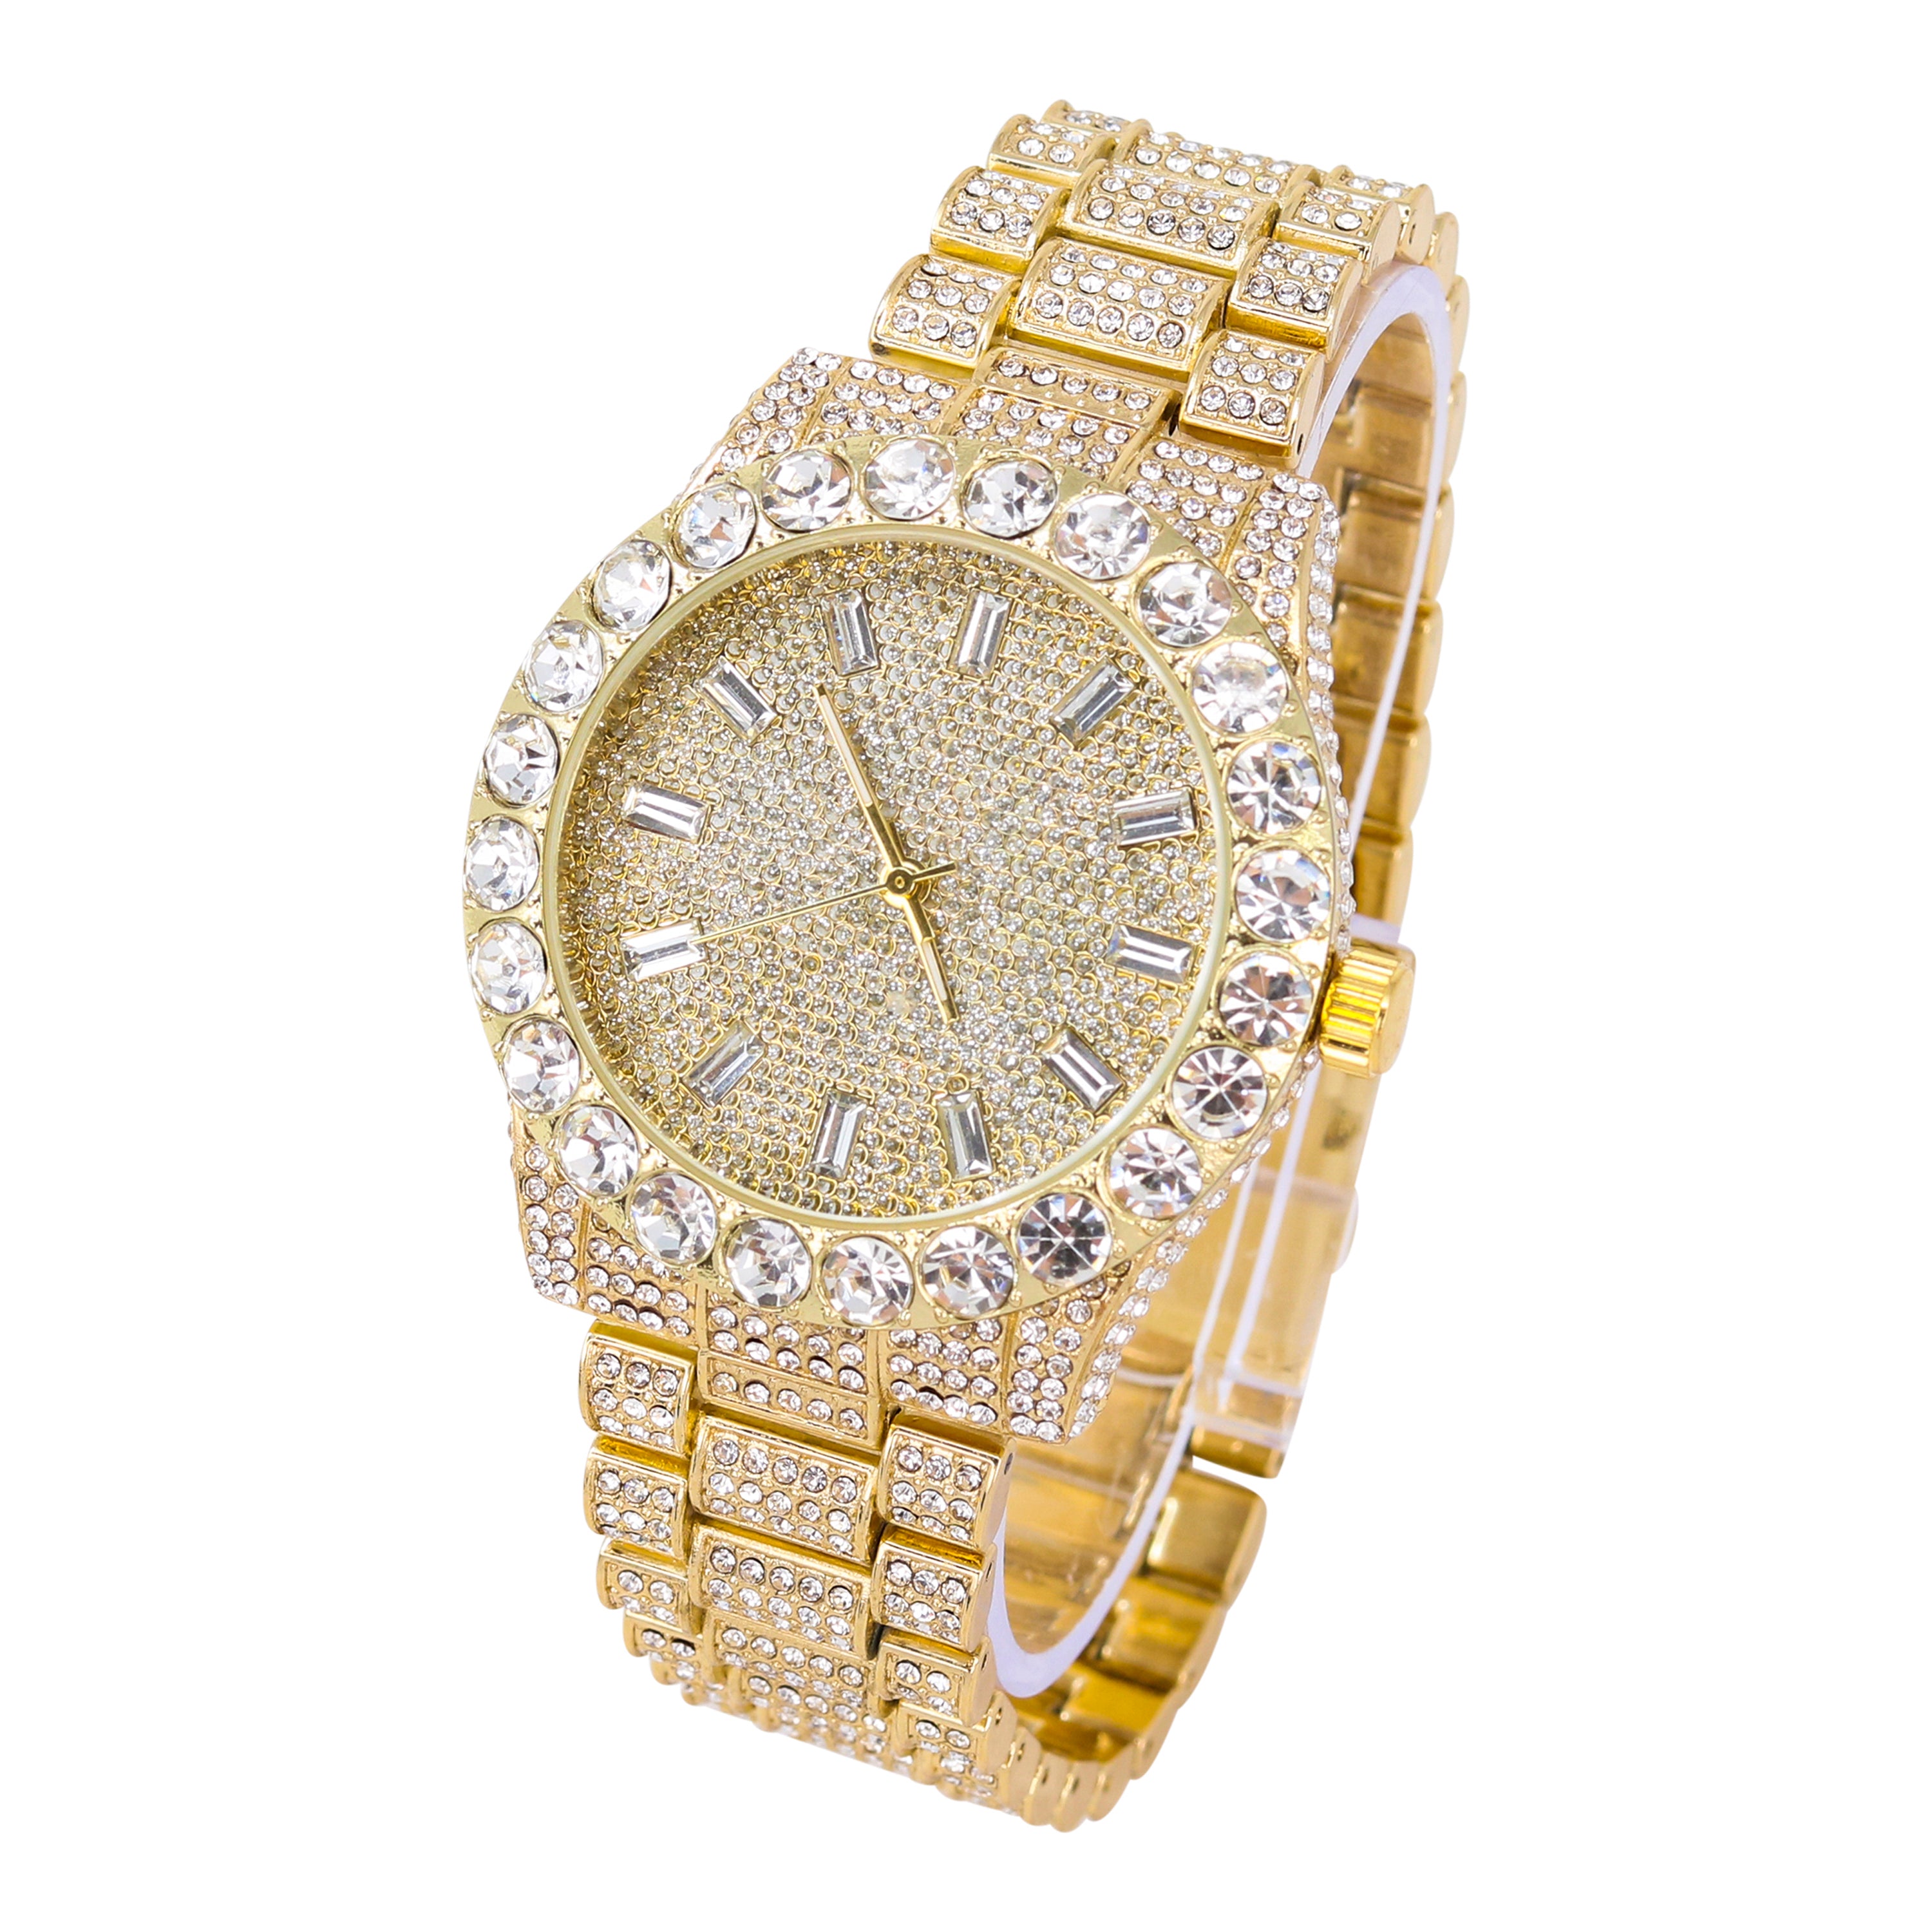 Men's Round Iced Out Watch 42mm Gold - Baguette Dial